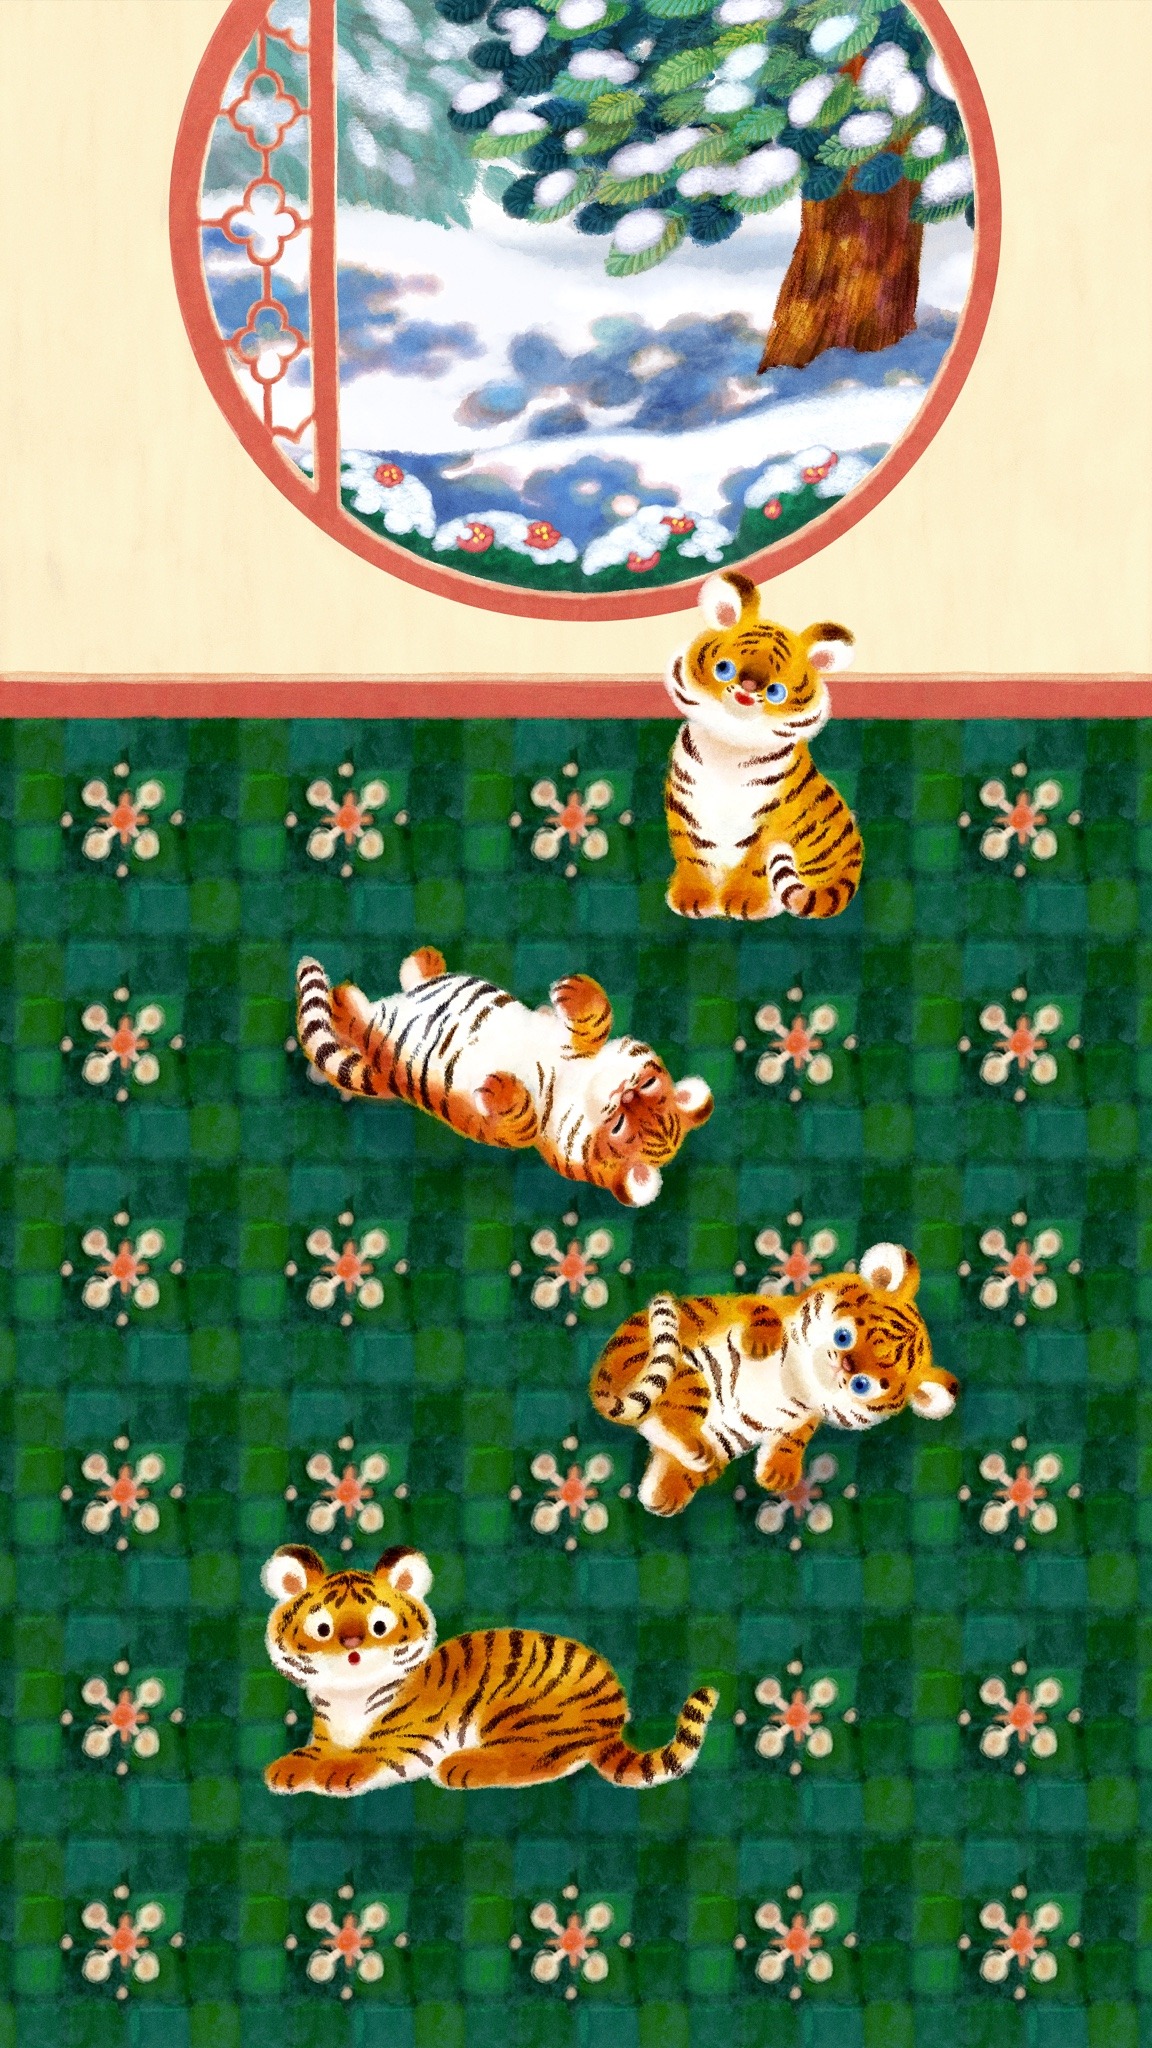 omochi-freedom:Baby tigers wallpaper!🐯🐯🐯🐯よかったら壁紙に使ってくださいPlease use them as wallpaper if you like!